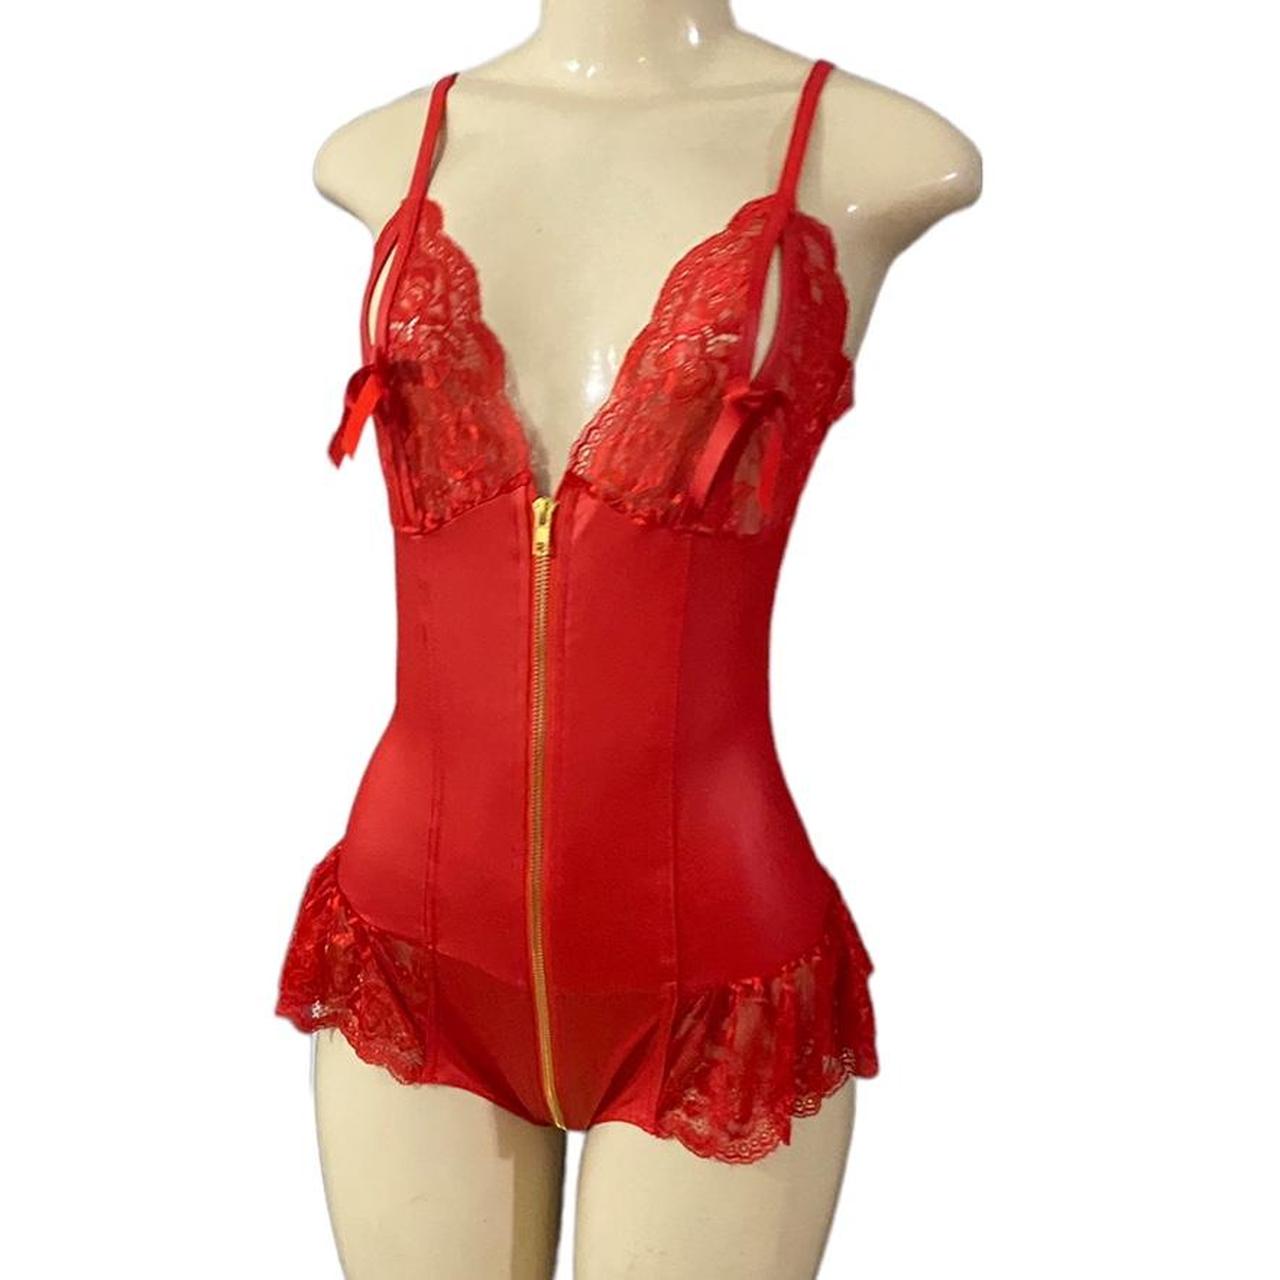 Product Image 2 - Red lingerie bodysuit 
Never worn